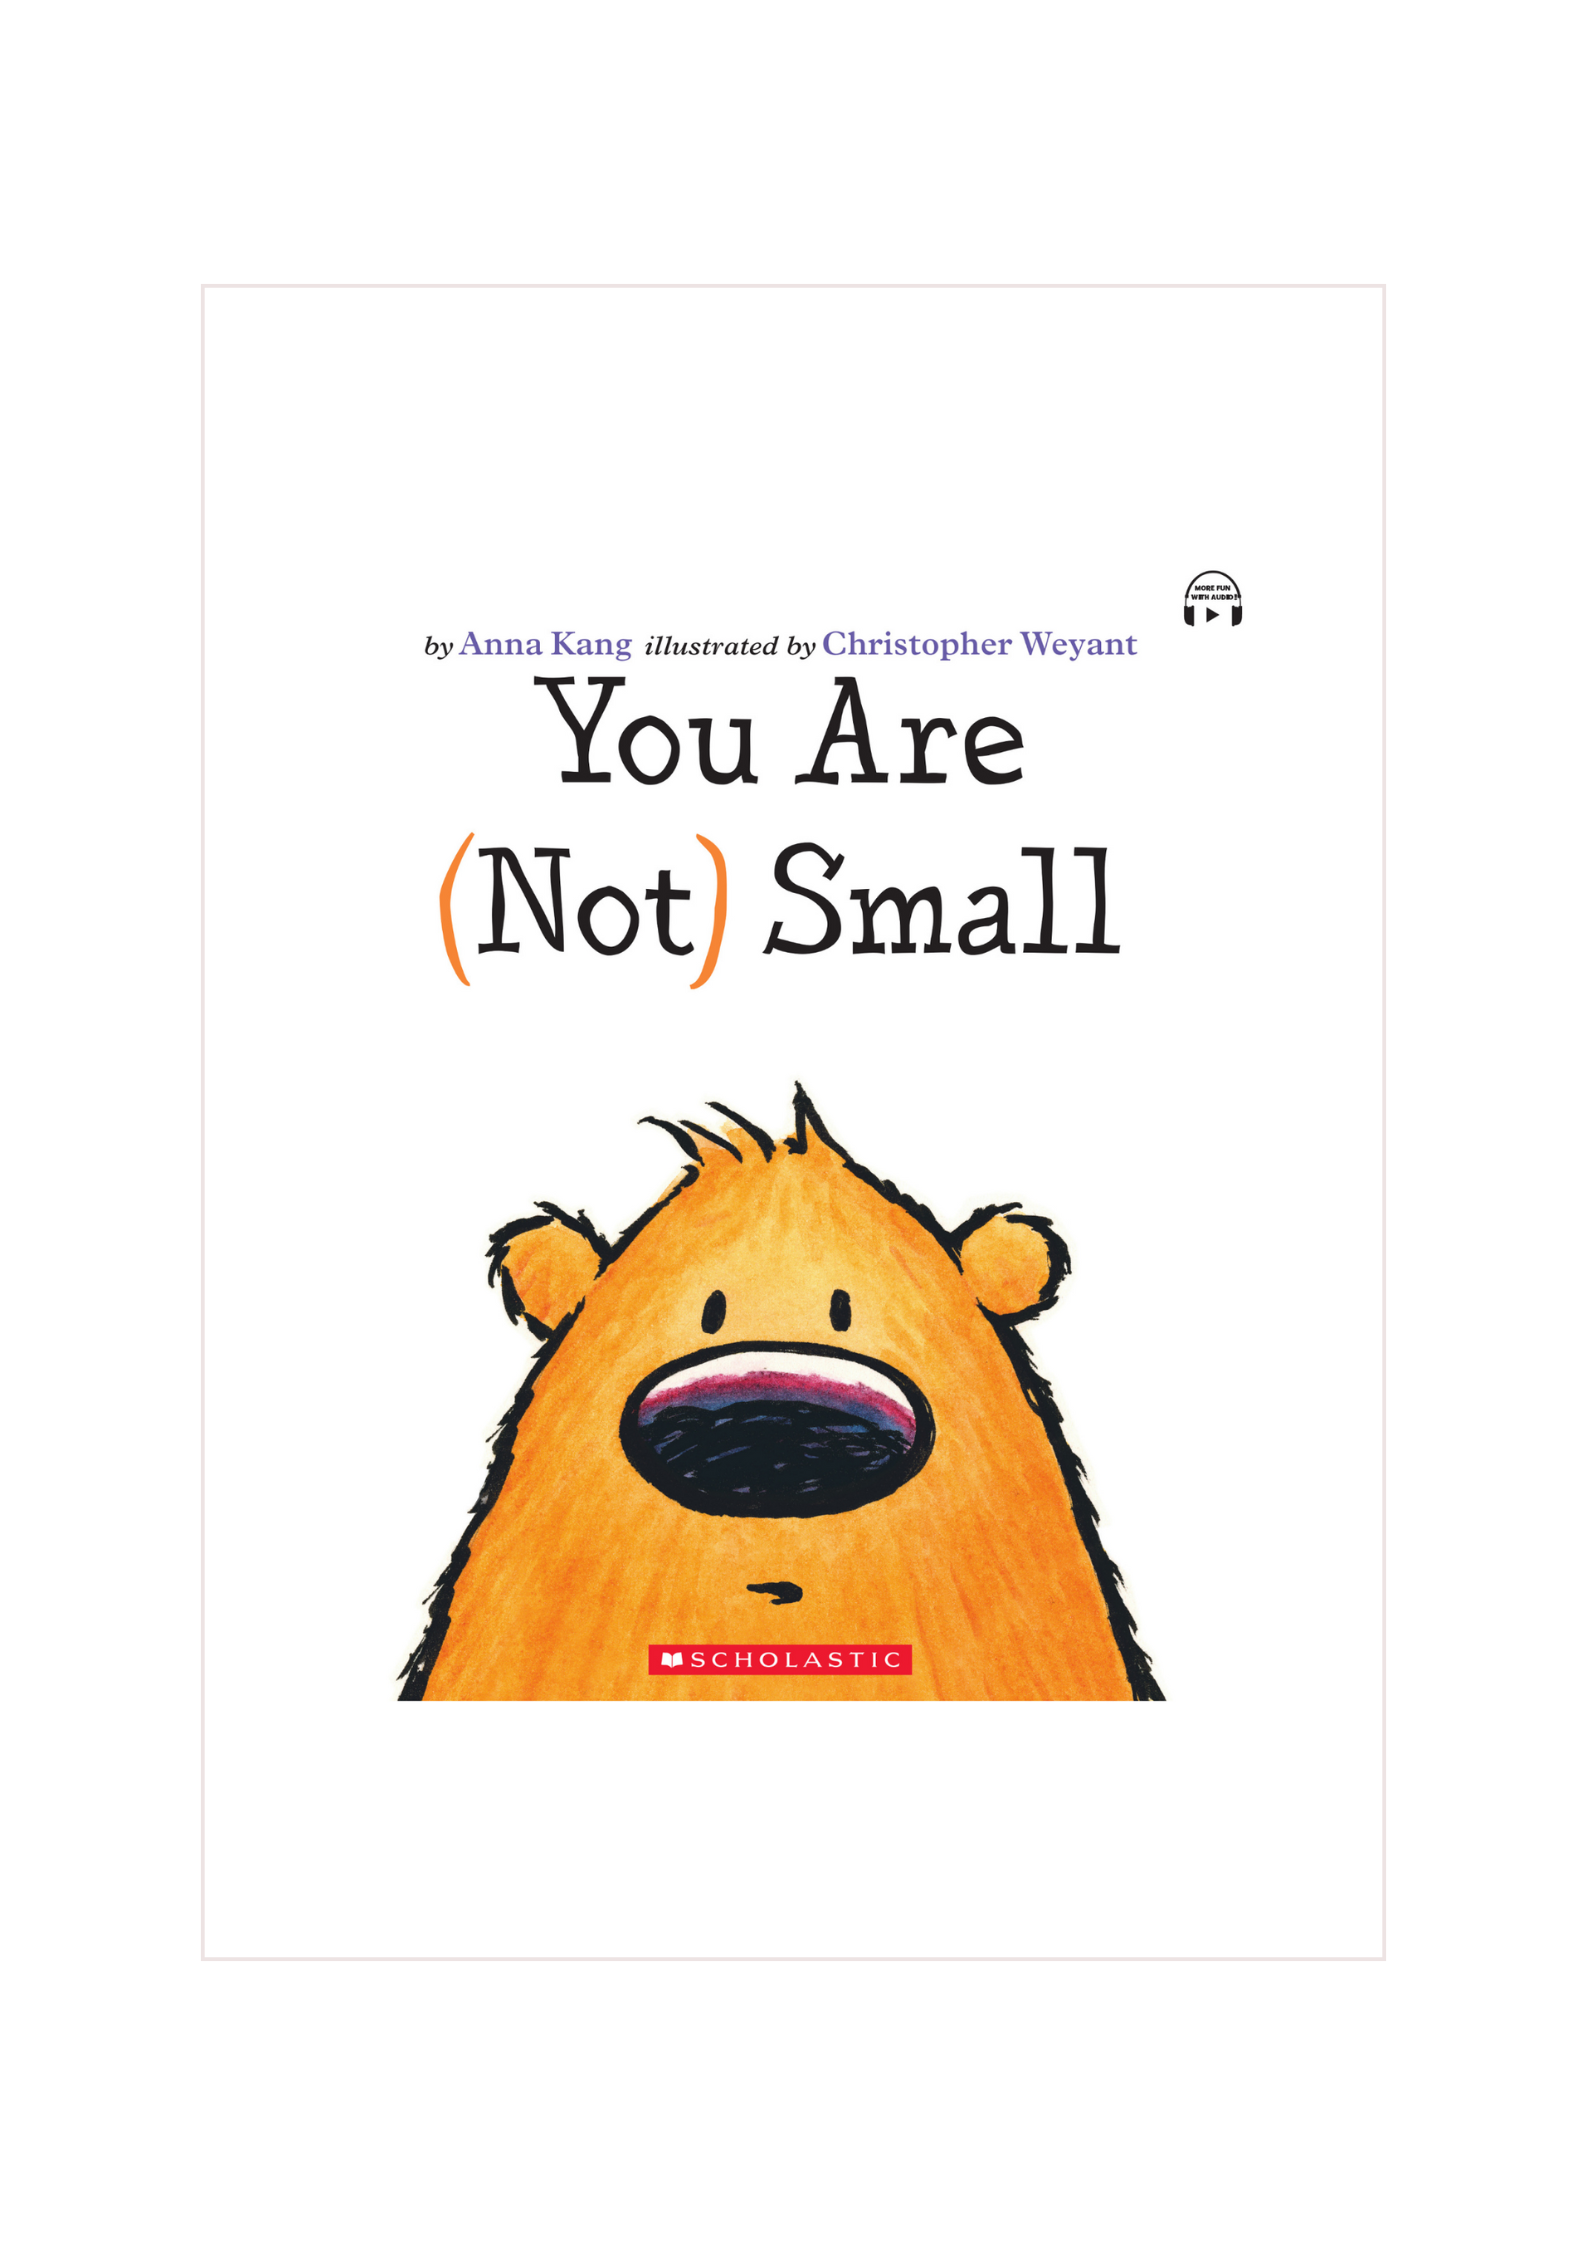 You Are (Not) Small (Scholastic Picture Book Garden 3)